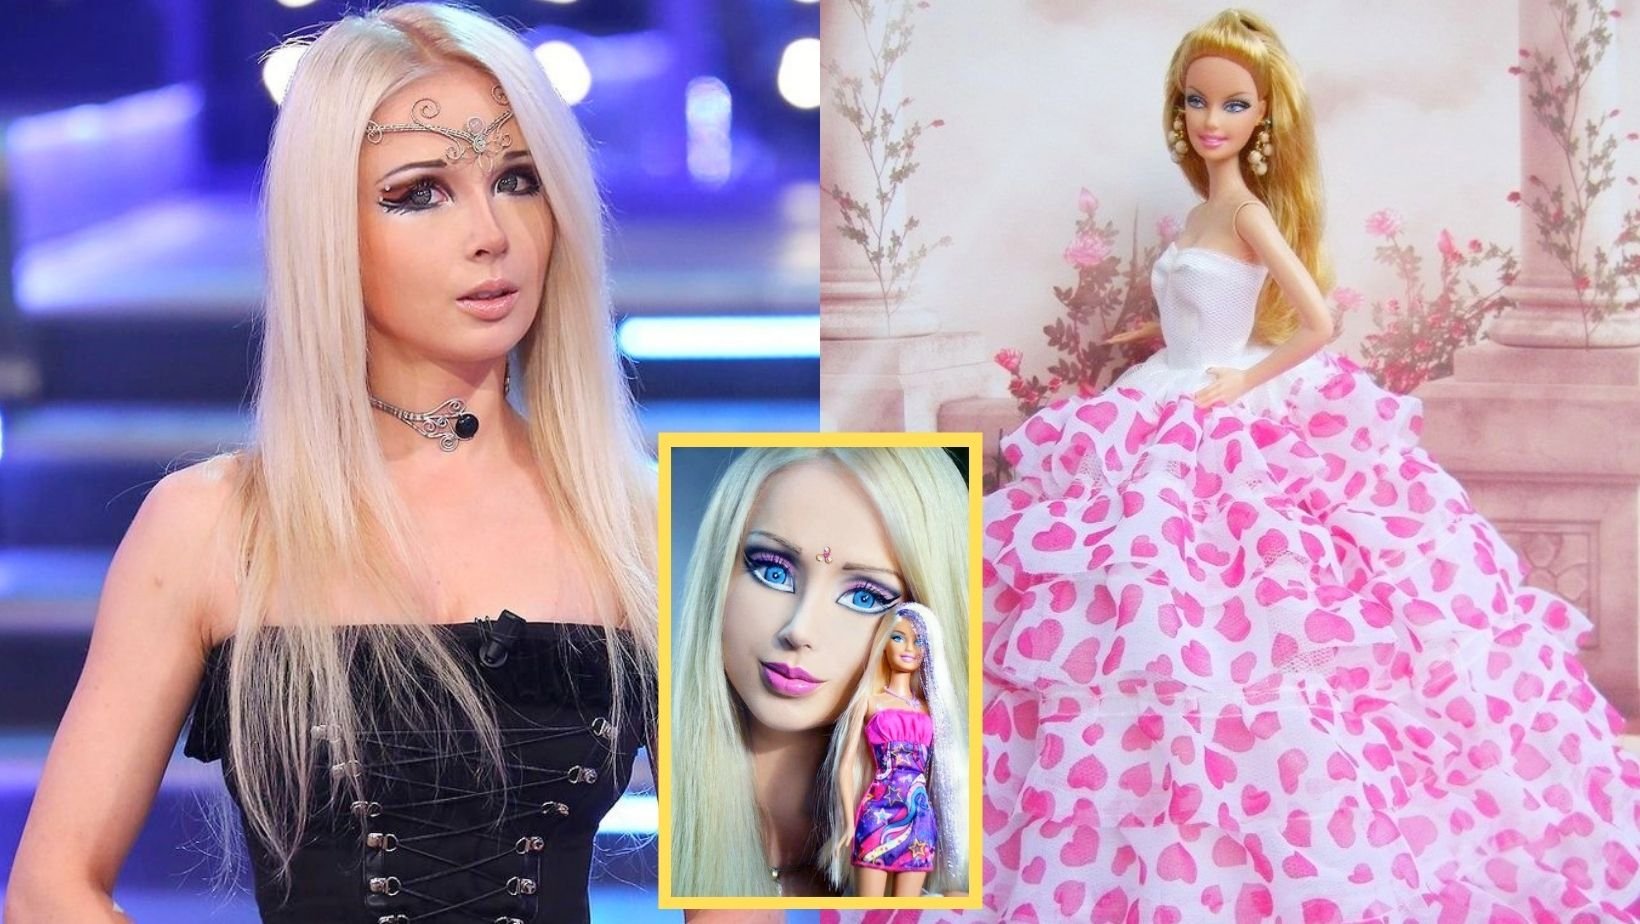 Human Barbie Denies Having Plastic Surgery Claims Her Doll Like Appearance Is All Natural